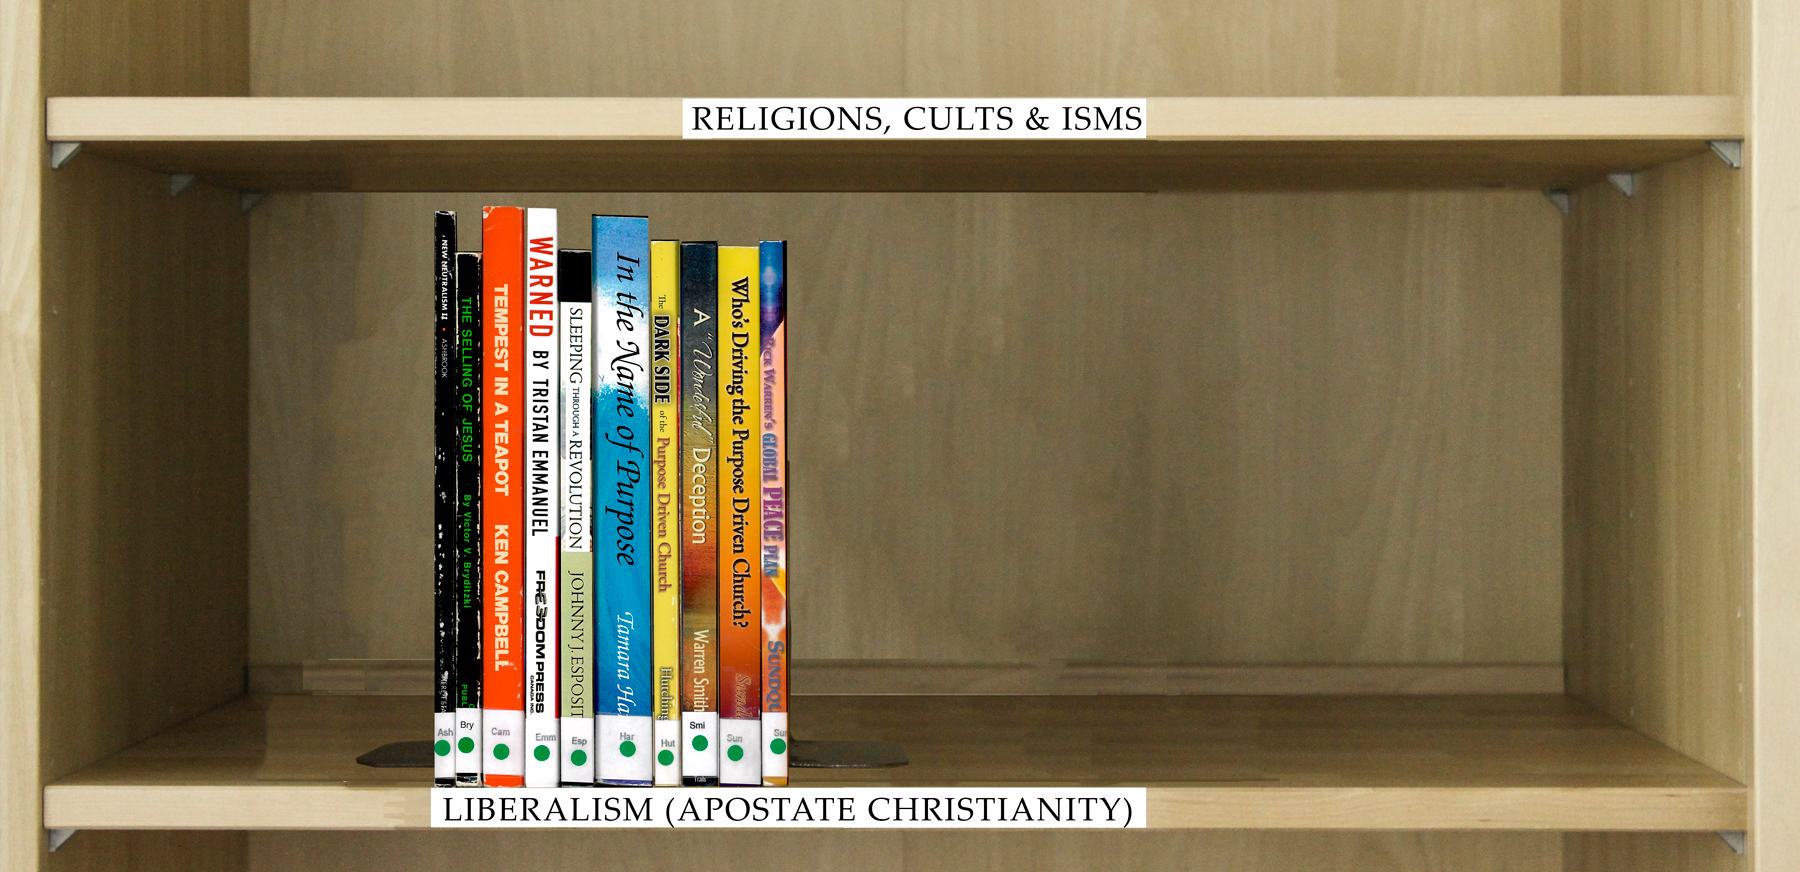 Index of Books Under the Category Liberalism (Apostate Cristianity).